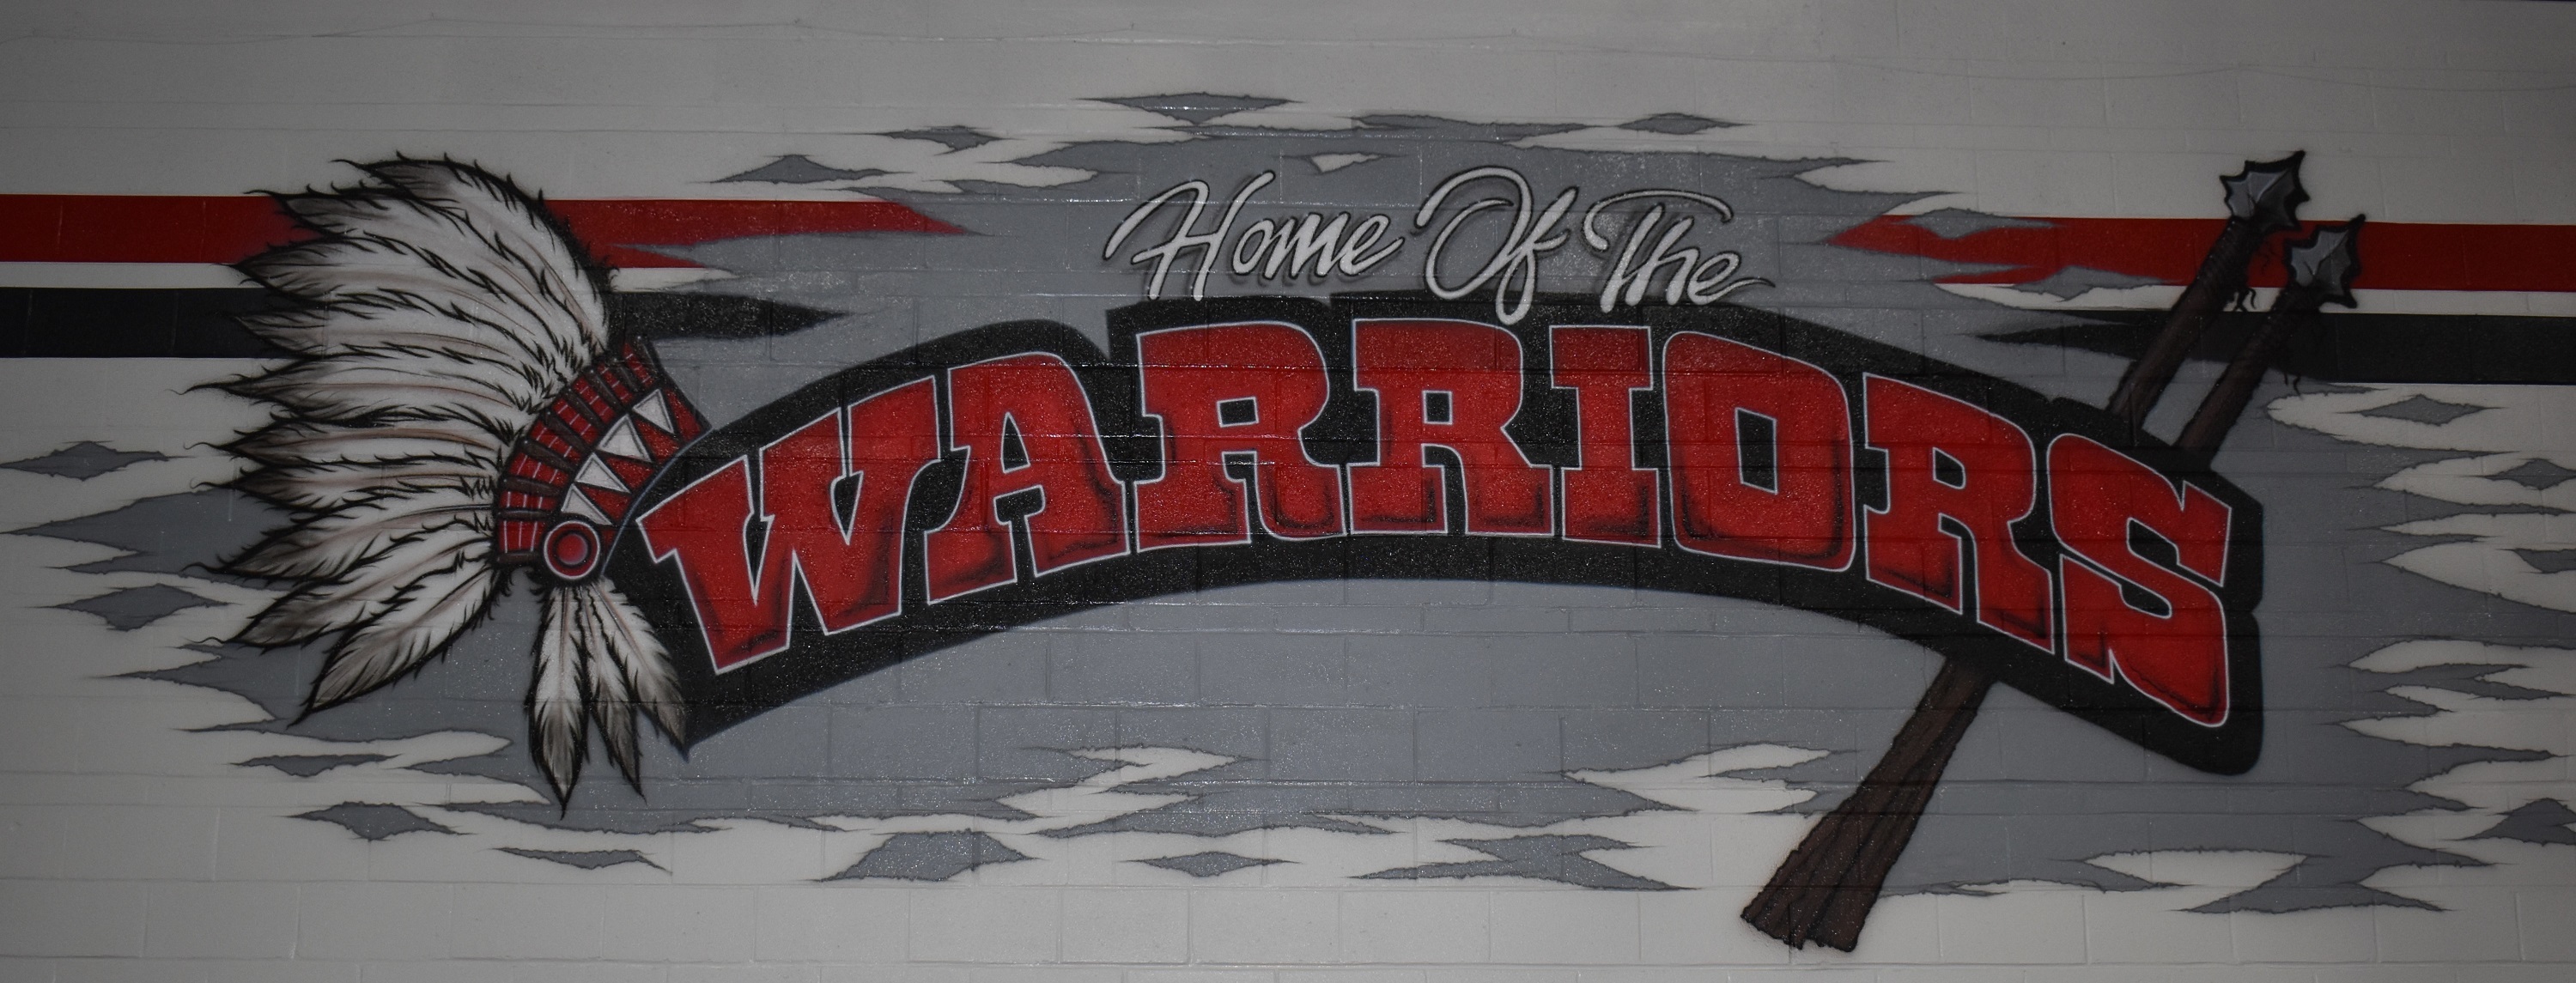 Home of the warriors